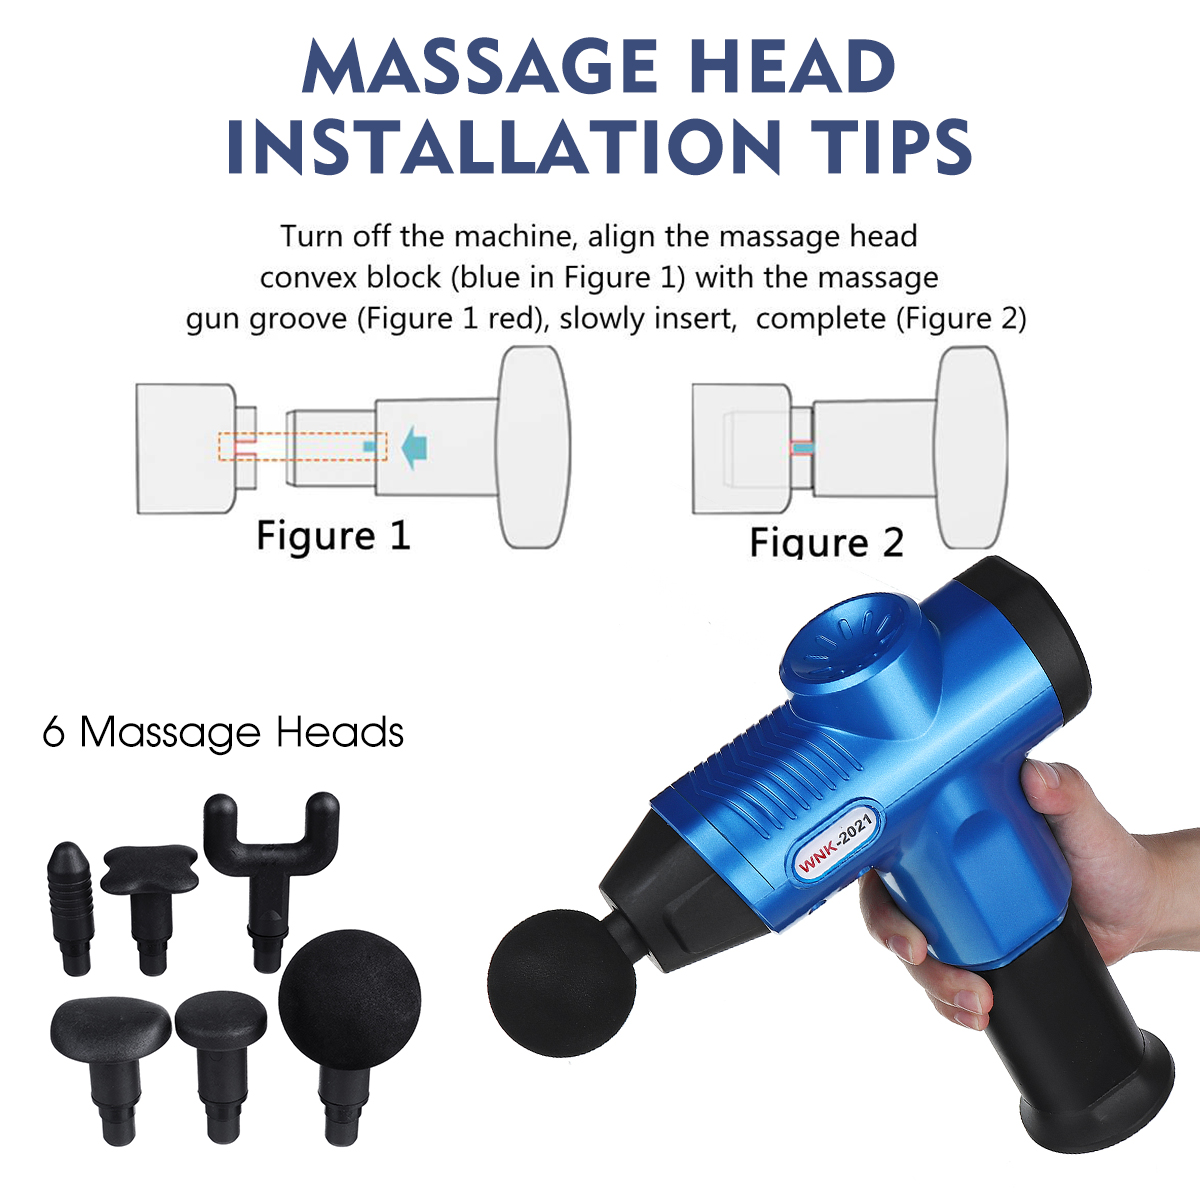 20-Gears-Electric-Percussion-Massager-USB-Rechargeable-Muscle-Vibration-Pain-Relief-Device-W-6-Heads-1725593-7